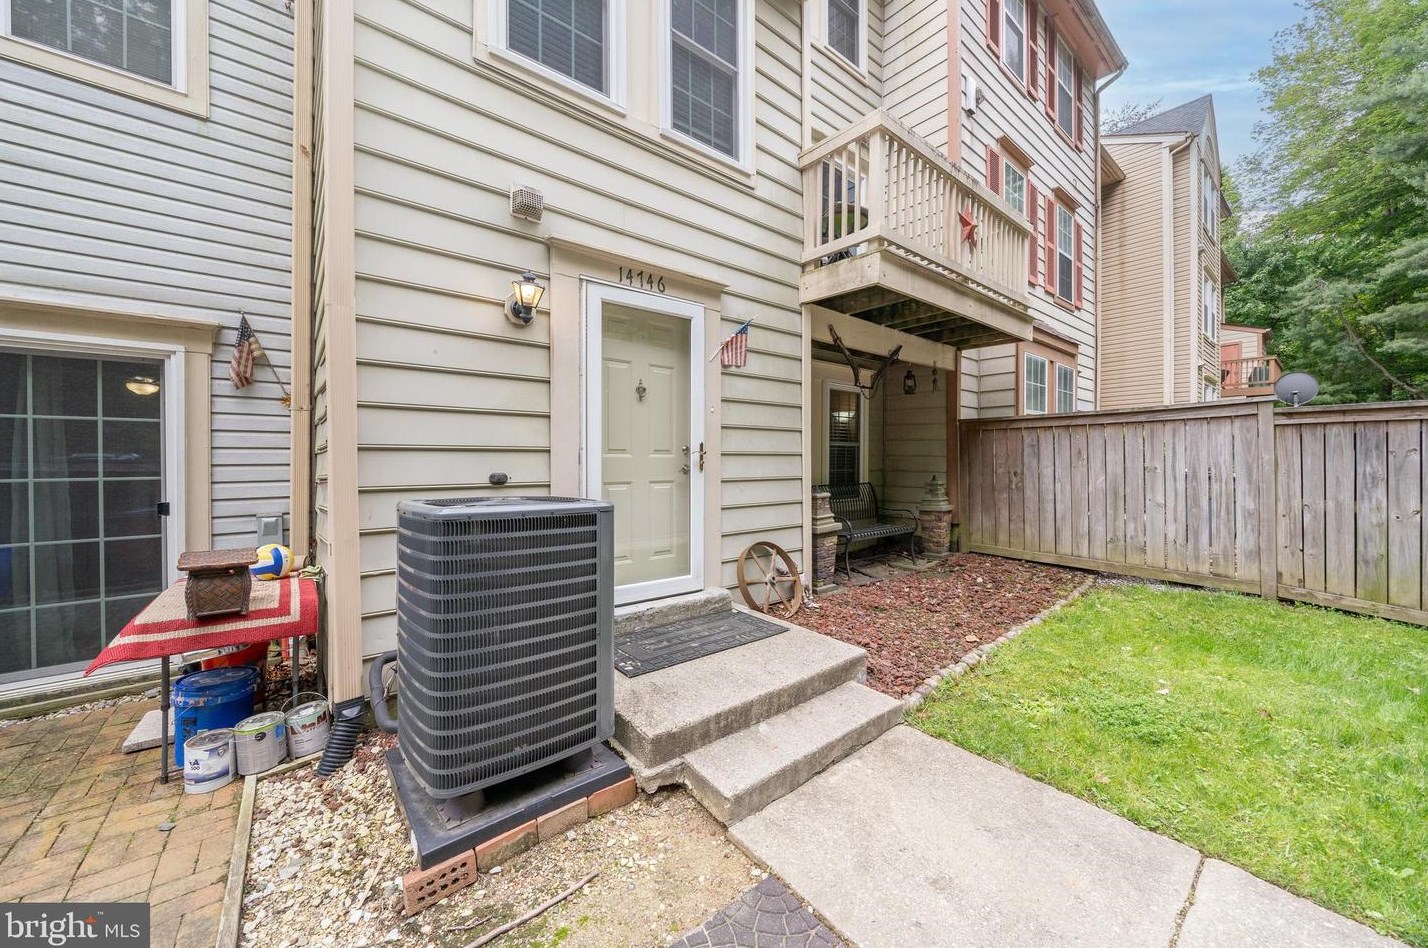 14746 Wexhall Terrace #25-268, Burtonsville, MD 20866